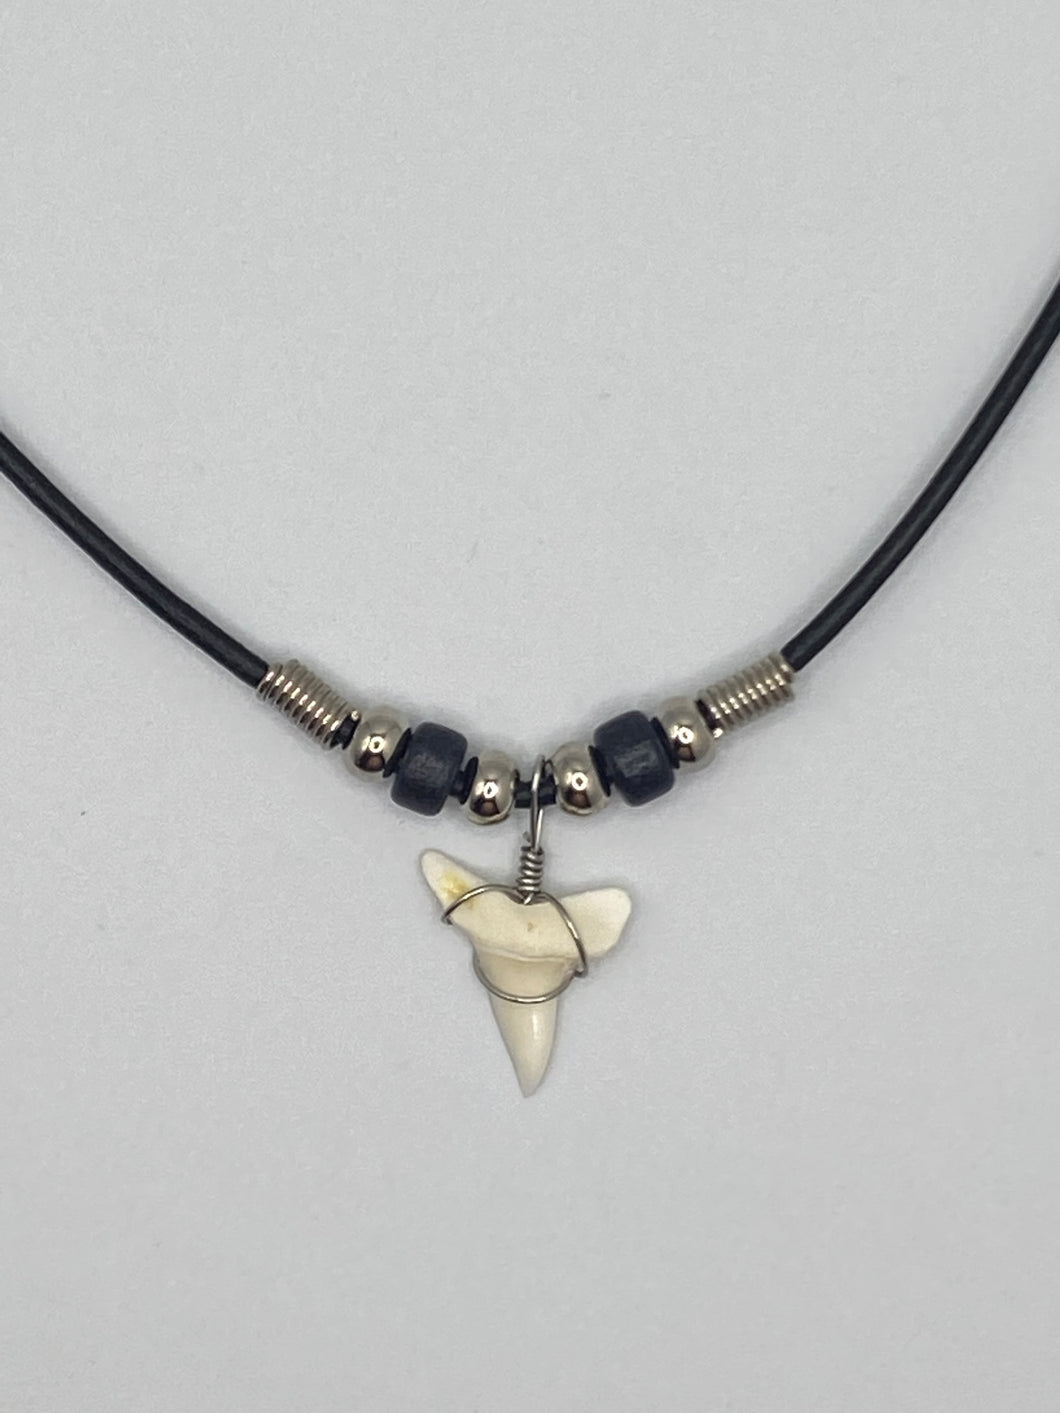 Swimmi 13! Genuine Mako Shark Tooth Necklace for Men Women Boy Girl with  Seed Beads and Adjustable Waxed Cord Handmade Jewelry GA056, Shark Tooth, shark  tooth : Swimmi: Amazon.ca: Clothing, Shoes &